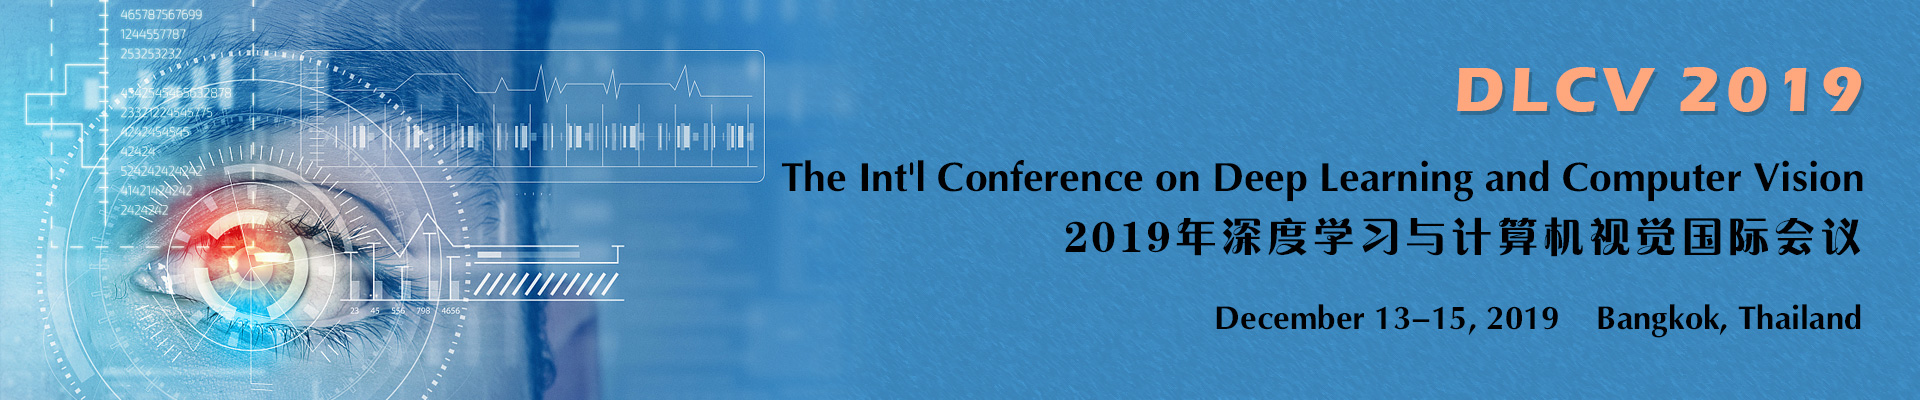 The Int'l Conference on Deep Learning and Computer Vision (DLCV 2019), Bangkok, Thailand